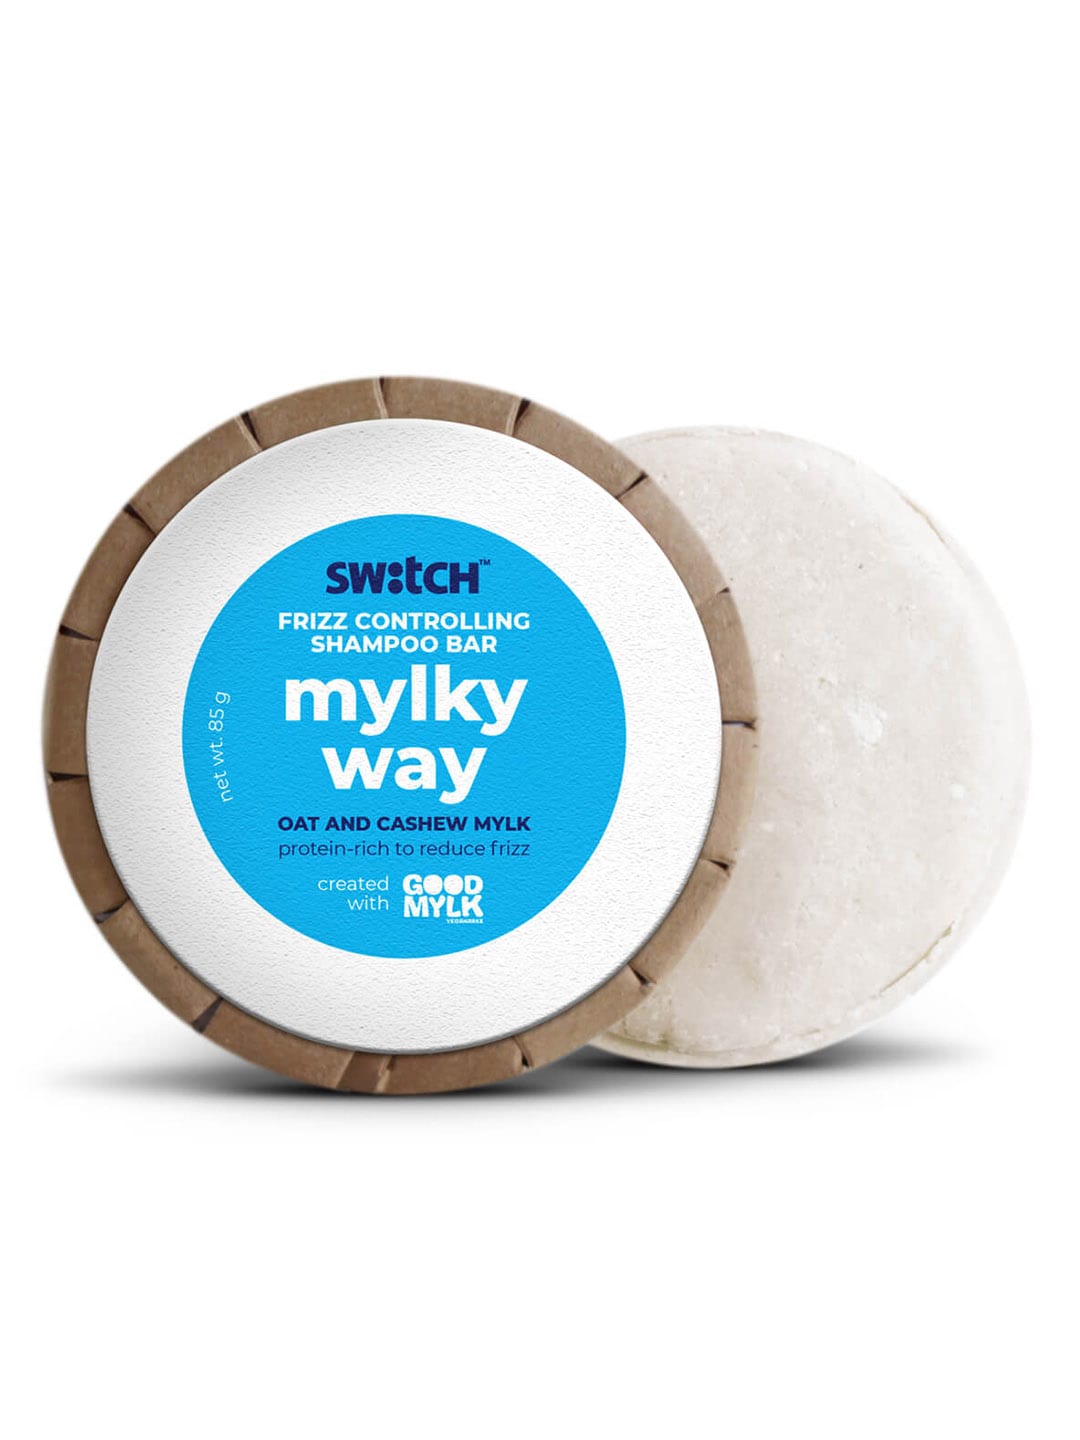 The Switch Fix Frizz Controlling Mylky Way Shampoo Bar for Dry and Frizzy Hair - 85g Price in India